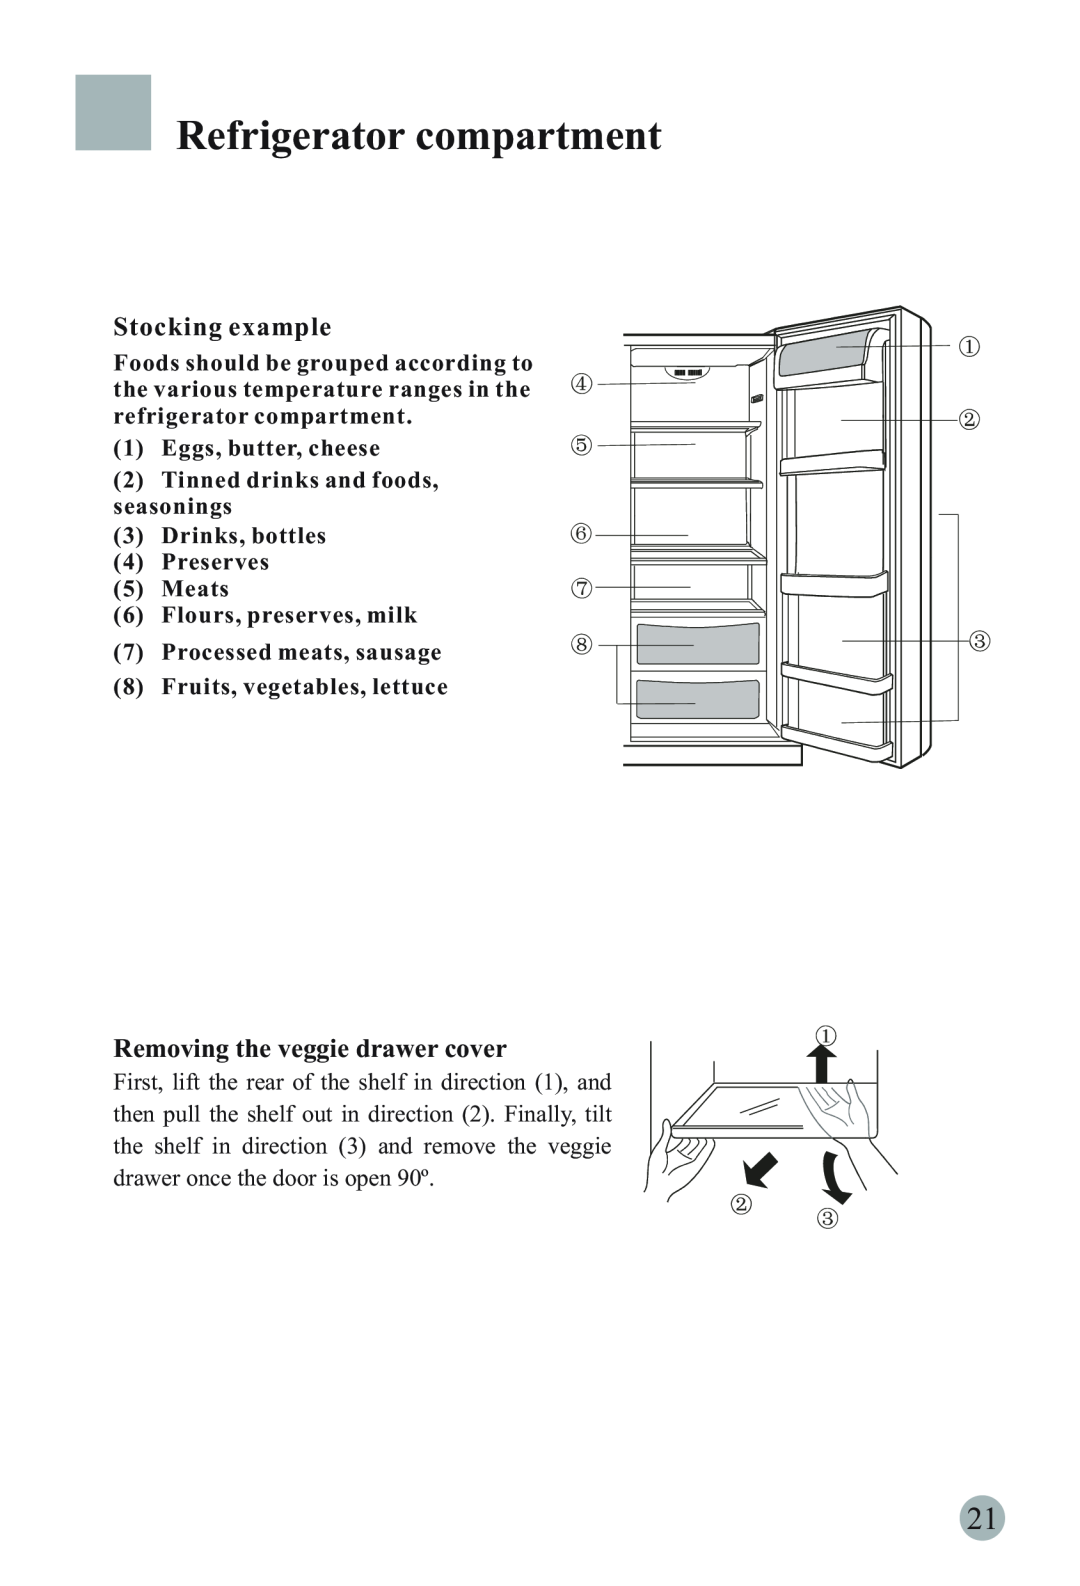 Haier HRF-6631RG manual Stocking example, Removing the veggie drawer cover, Refrigerator compartment, Eggs, butter, cheese 